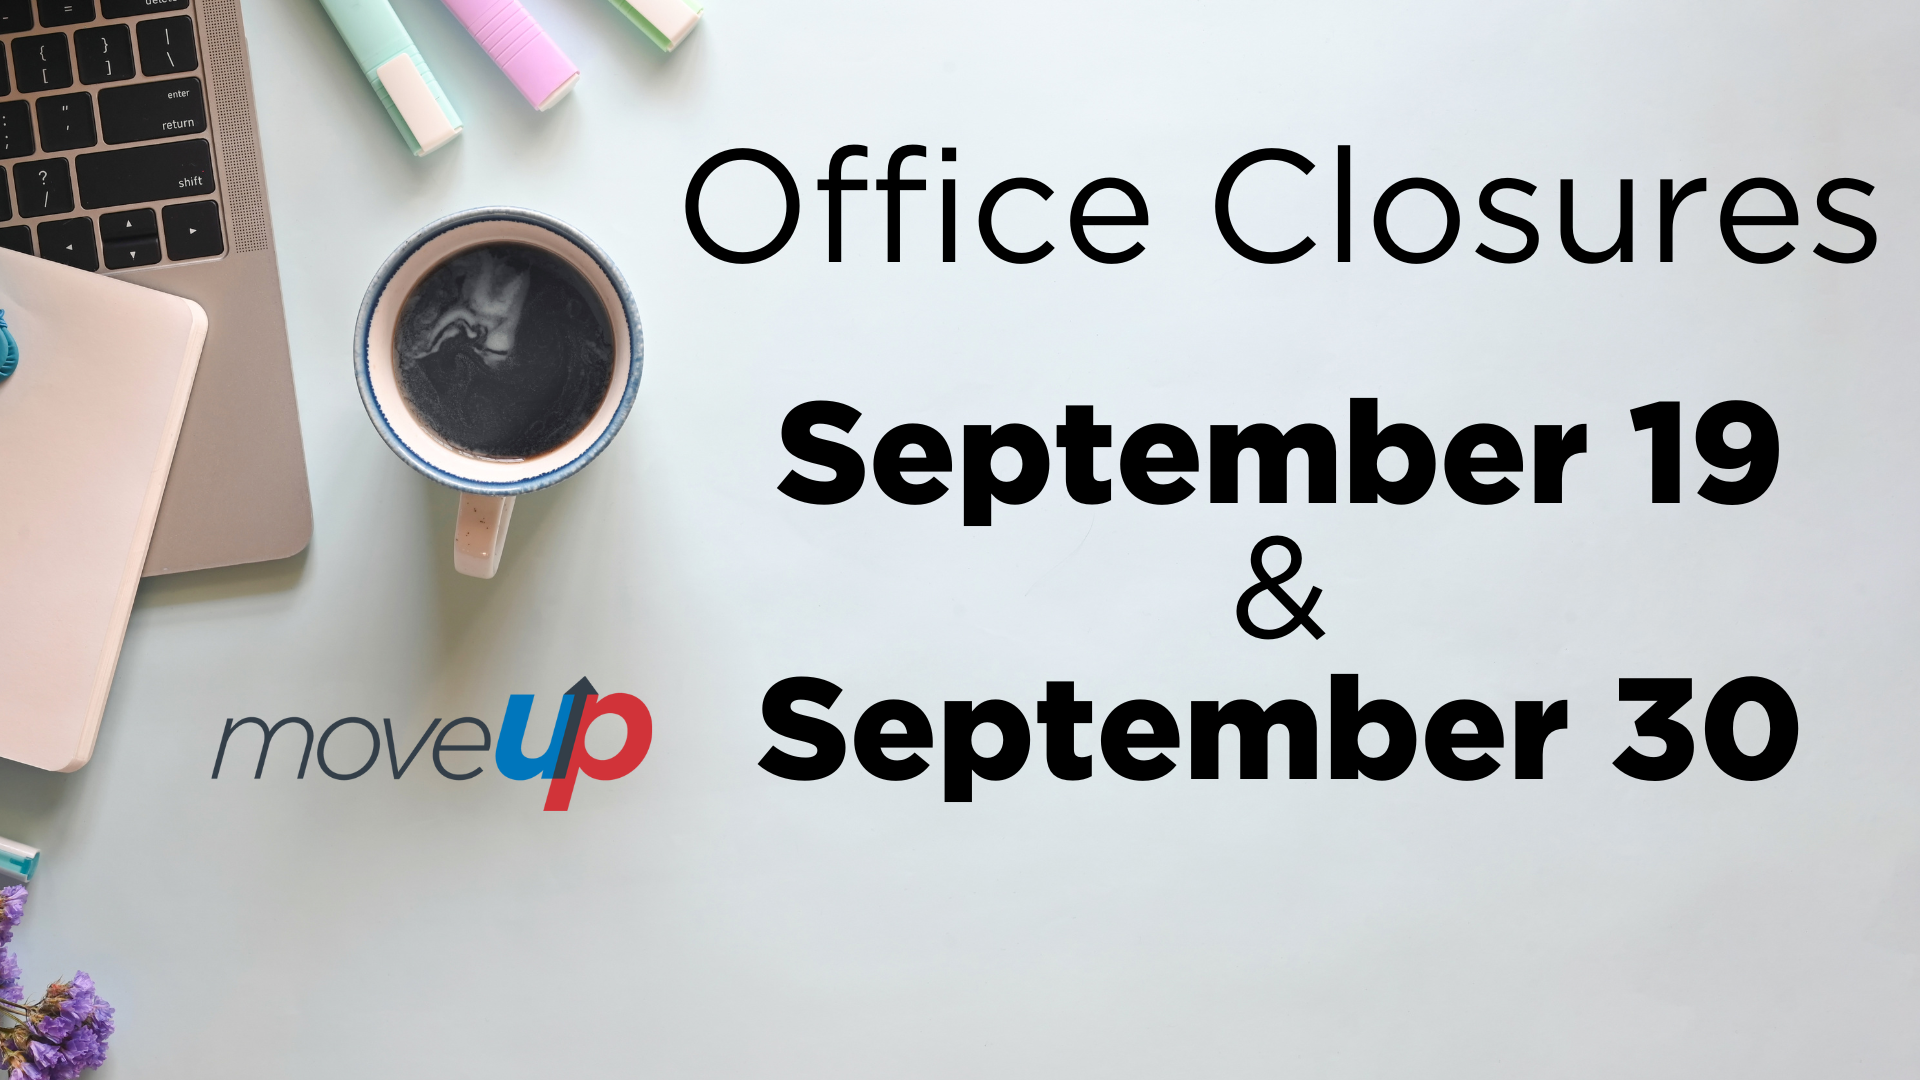 Desk with laptop and coffee cup with text reading: Office Closures September 19 & September 30